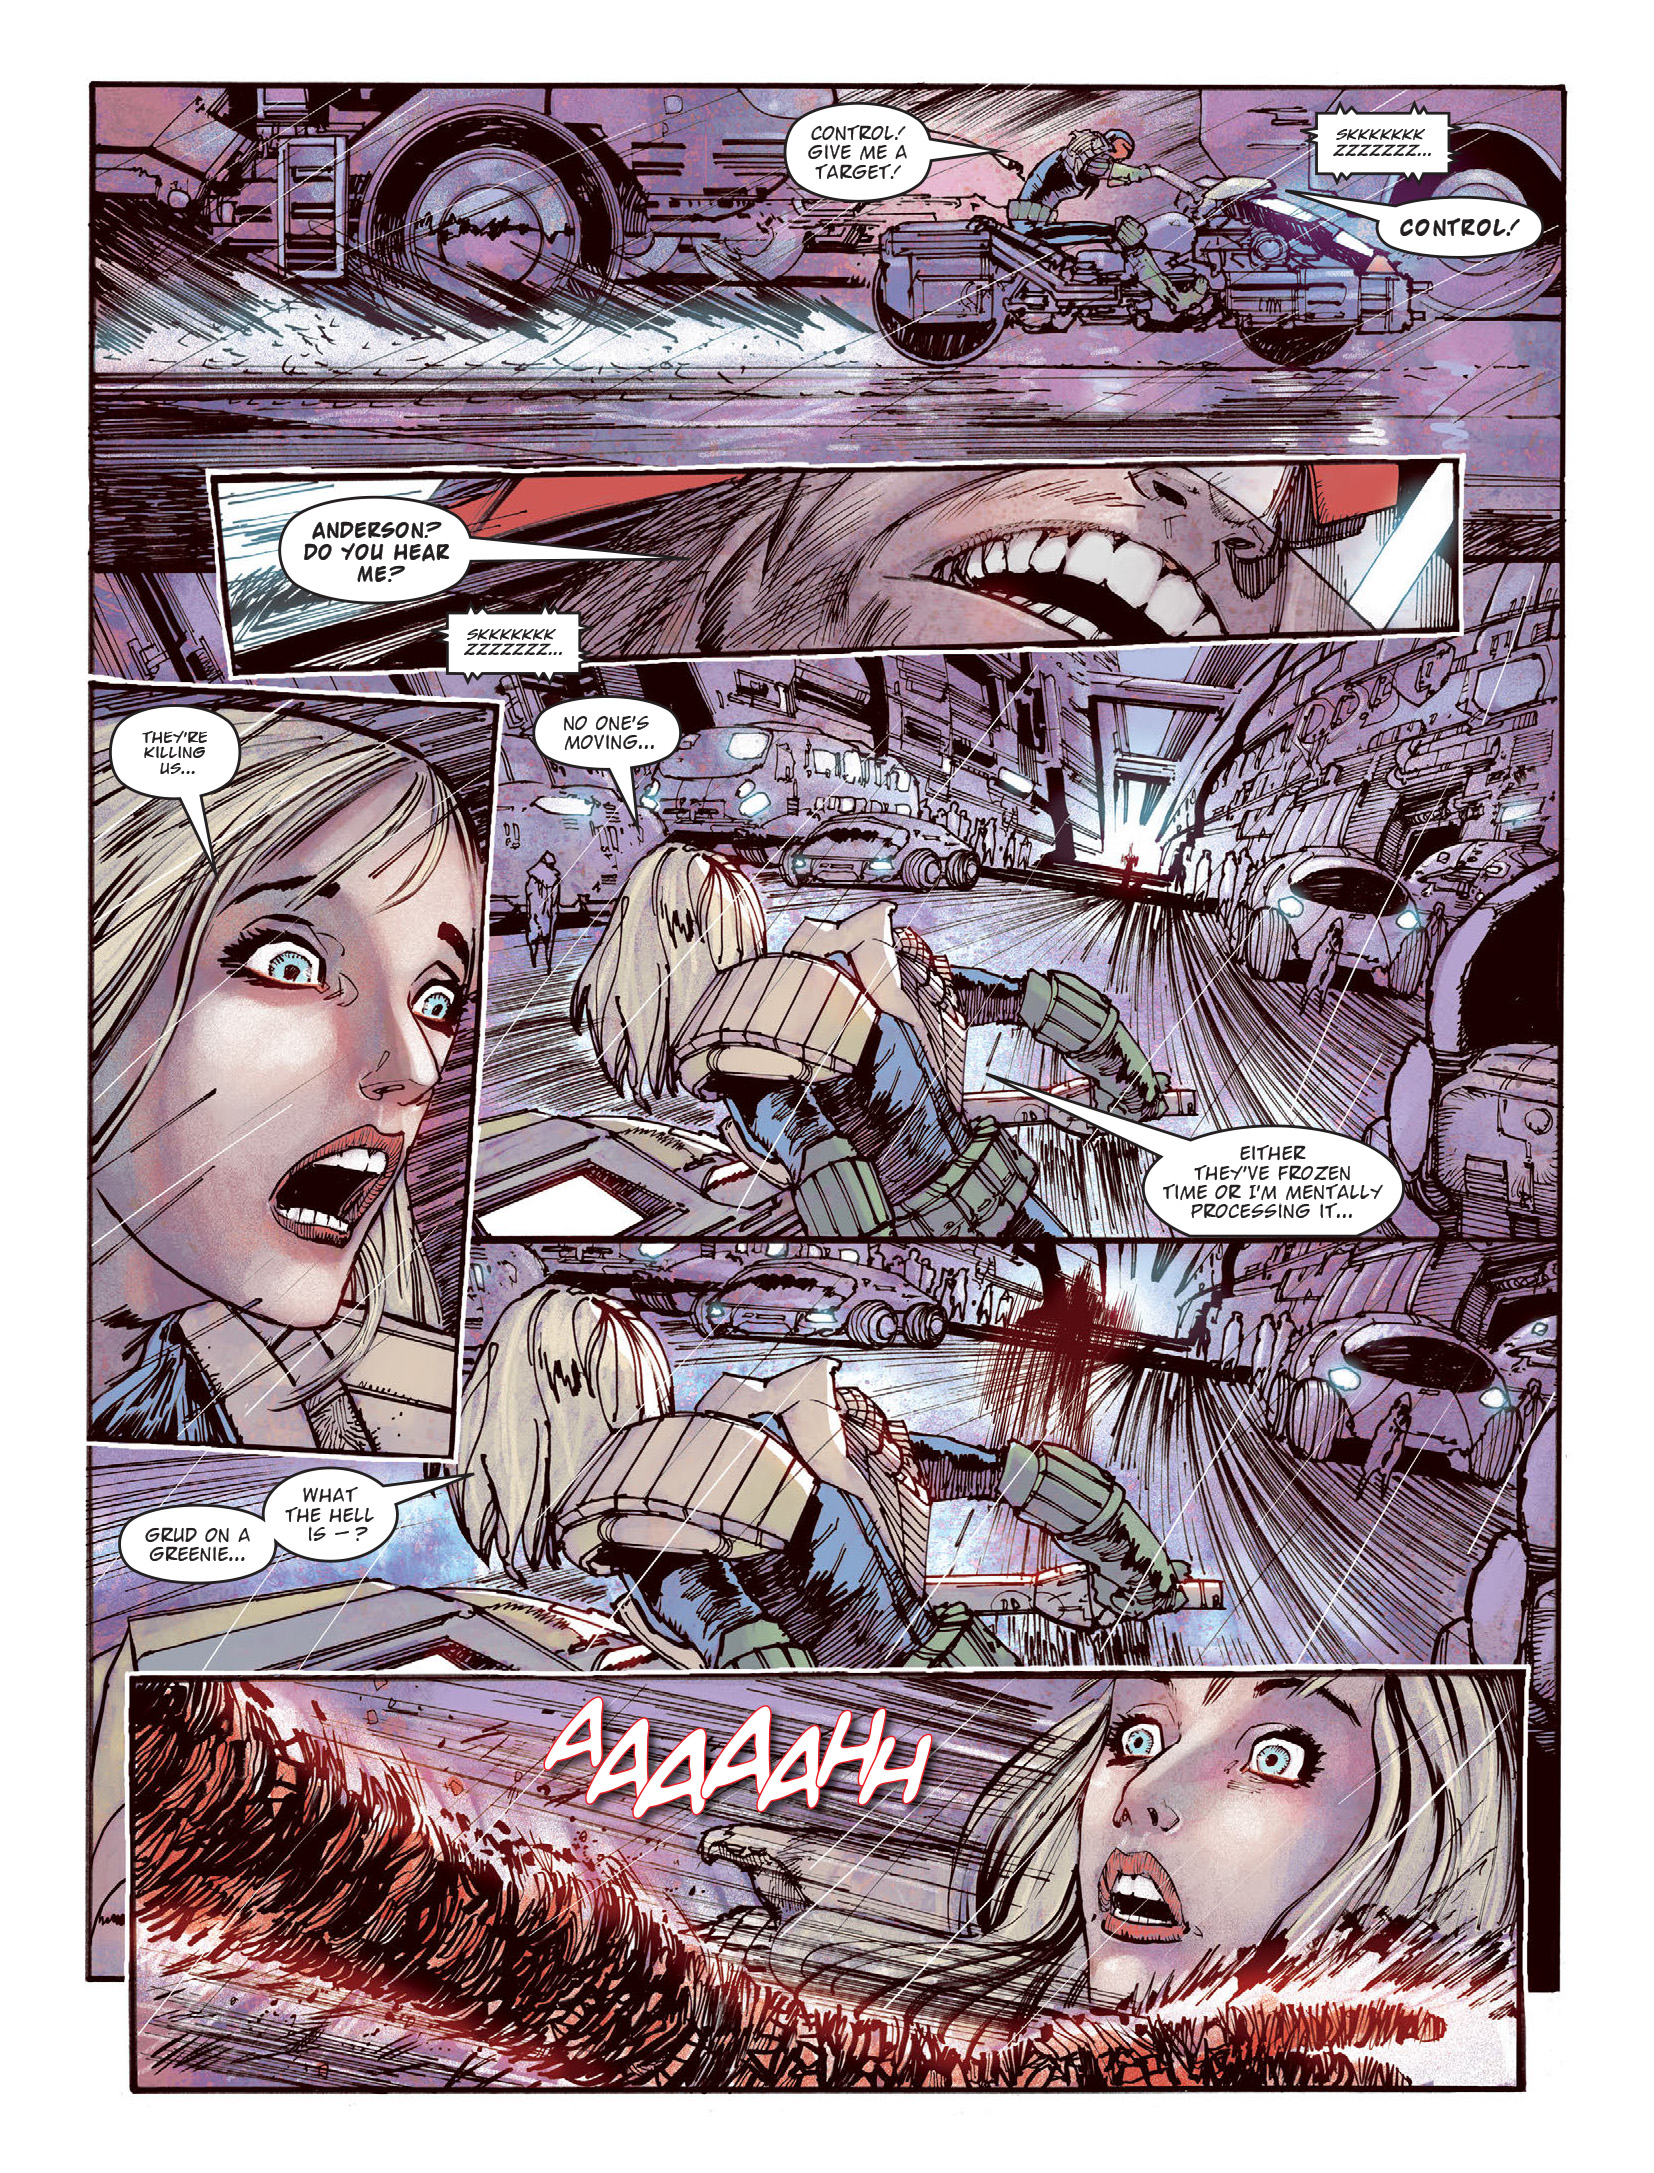 2000 AD: Chapter 2307 - Page 5